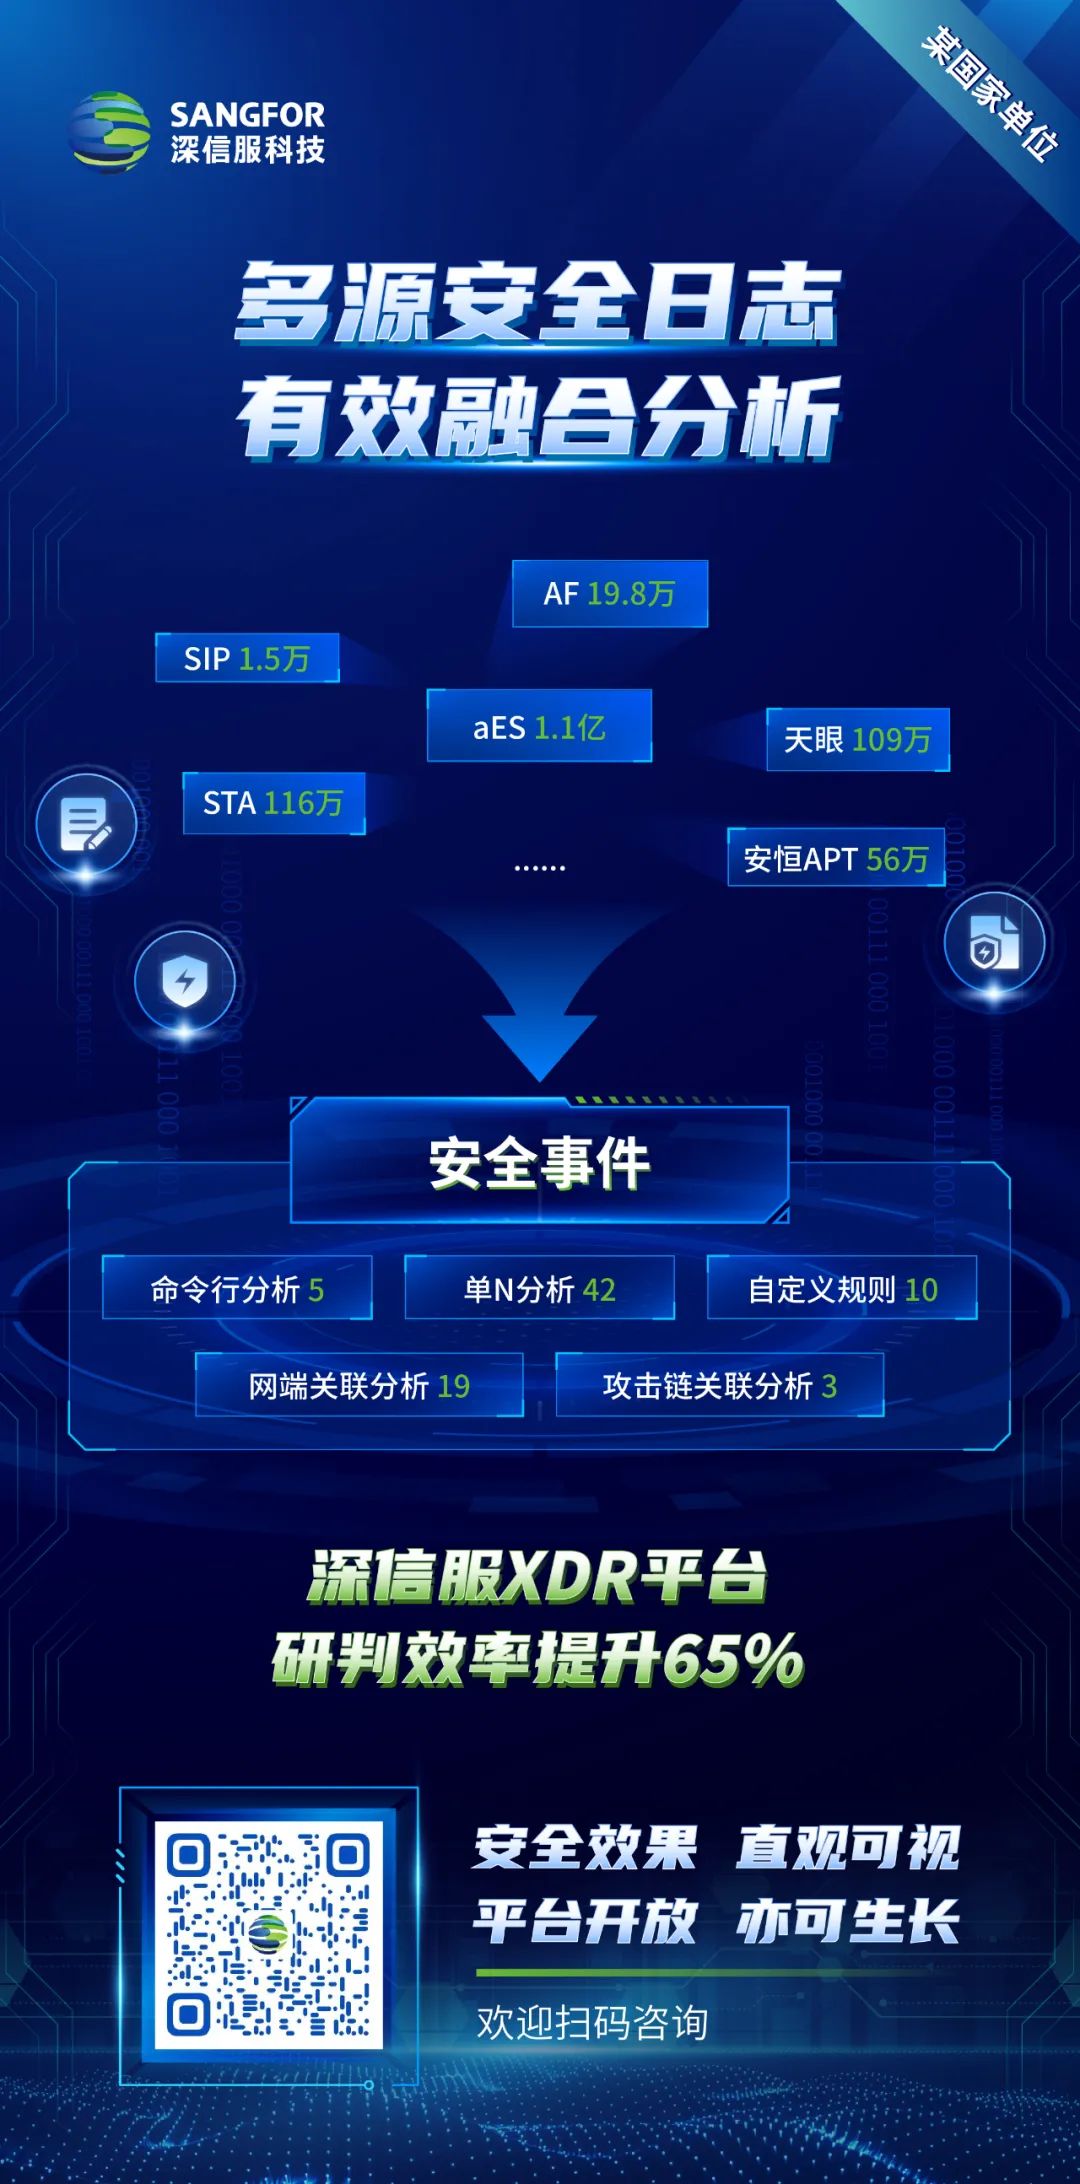 <a href='https://www.sangfor.com.cn/product-and-solution/sangfor-security/xdr'><a href='https://www.sangfor.com.cn/product-and-solution/sangfor-security/xdr'><a href='https://www.sangfor.com.cn/product-and-solution/sangfor-security/xdr'>XDR</a></a></a>平台